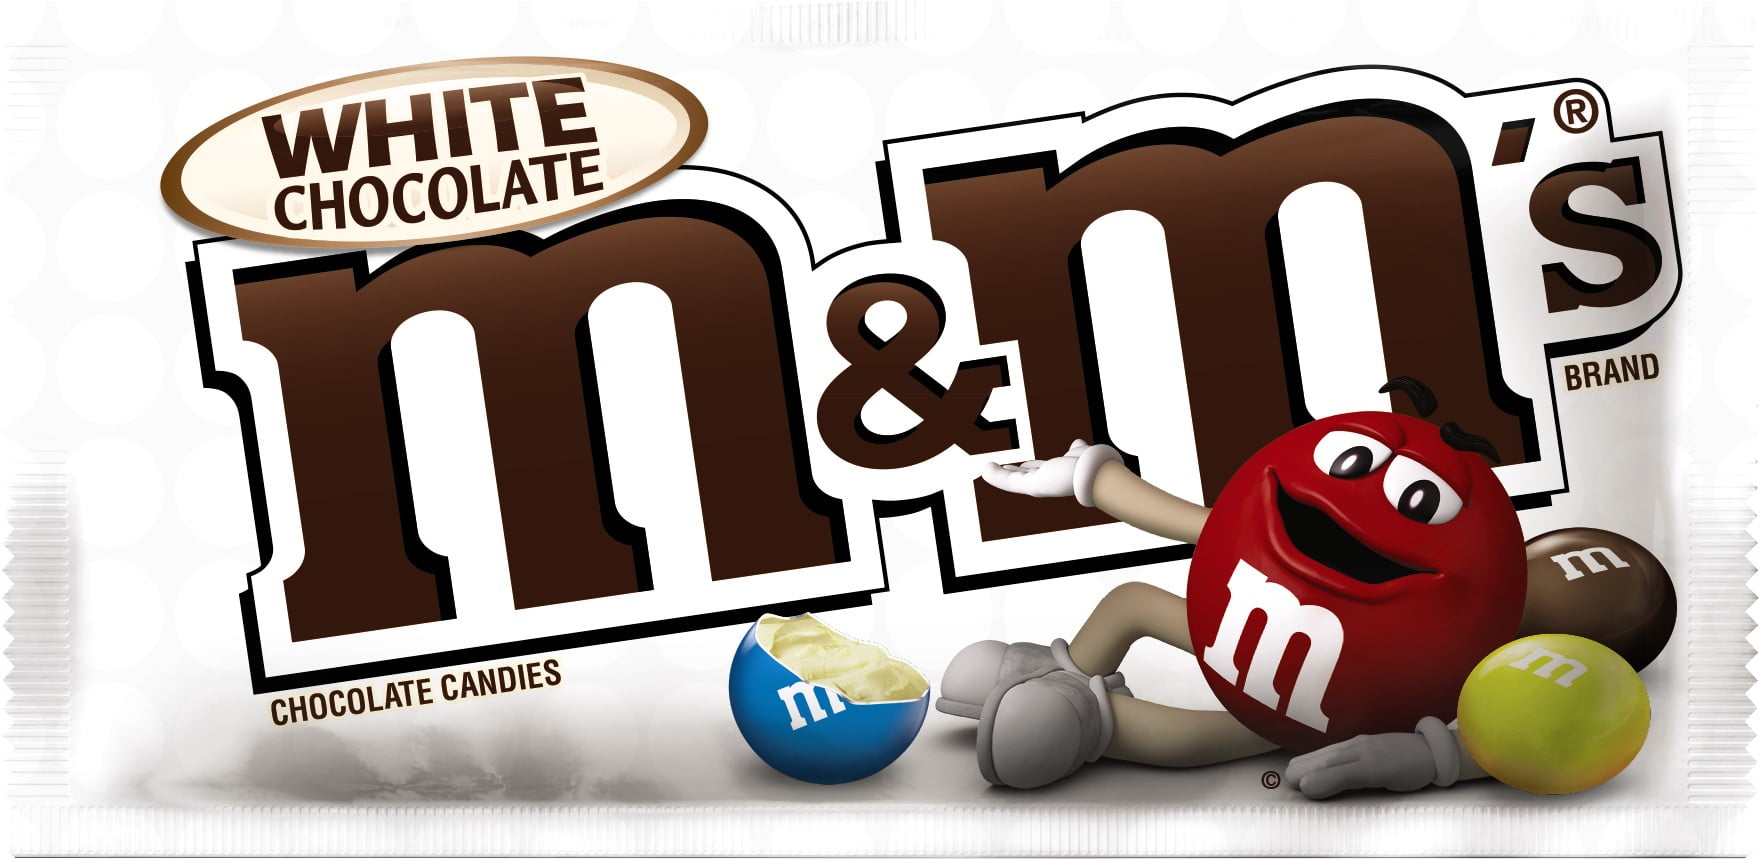 M&M's White Chocolate Candy, Full Size - 1.41 oz Bag